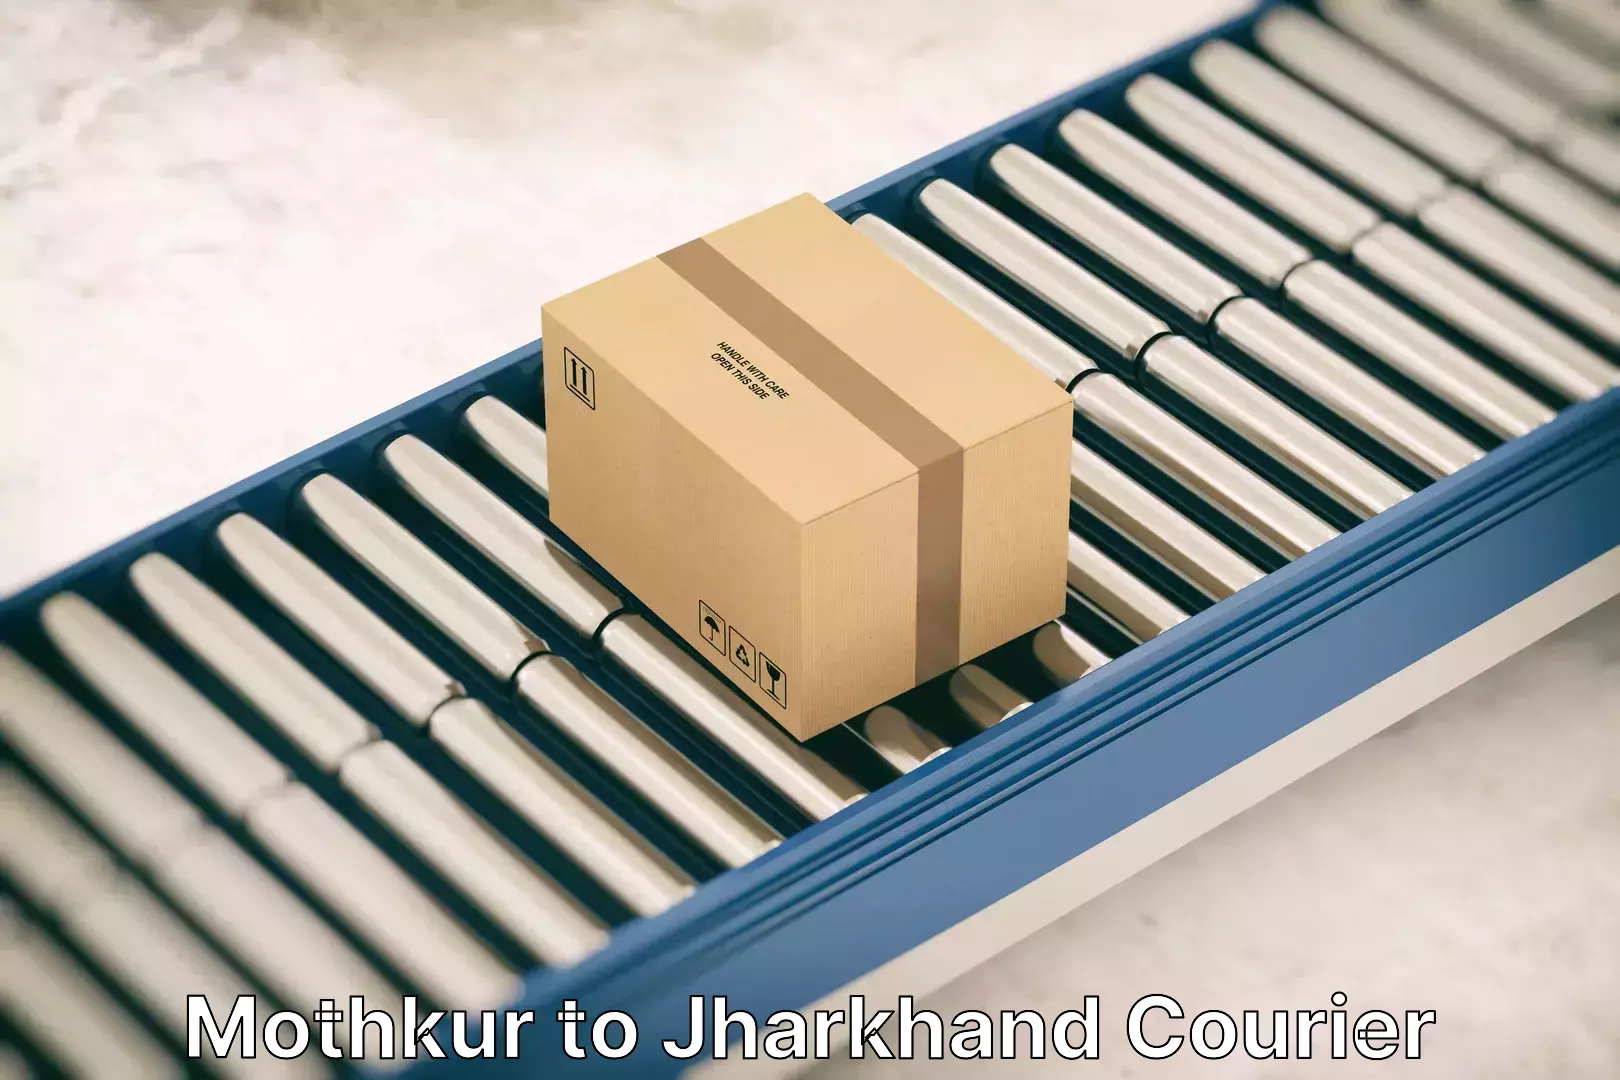 Full-service movers Mothkur to Jharkhand